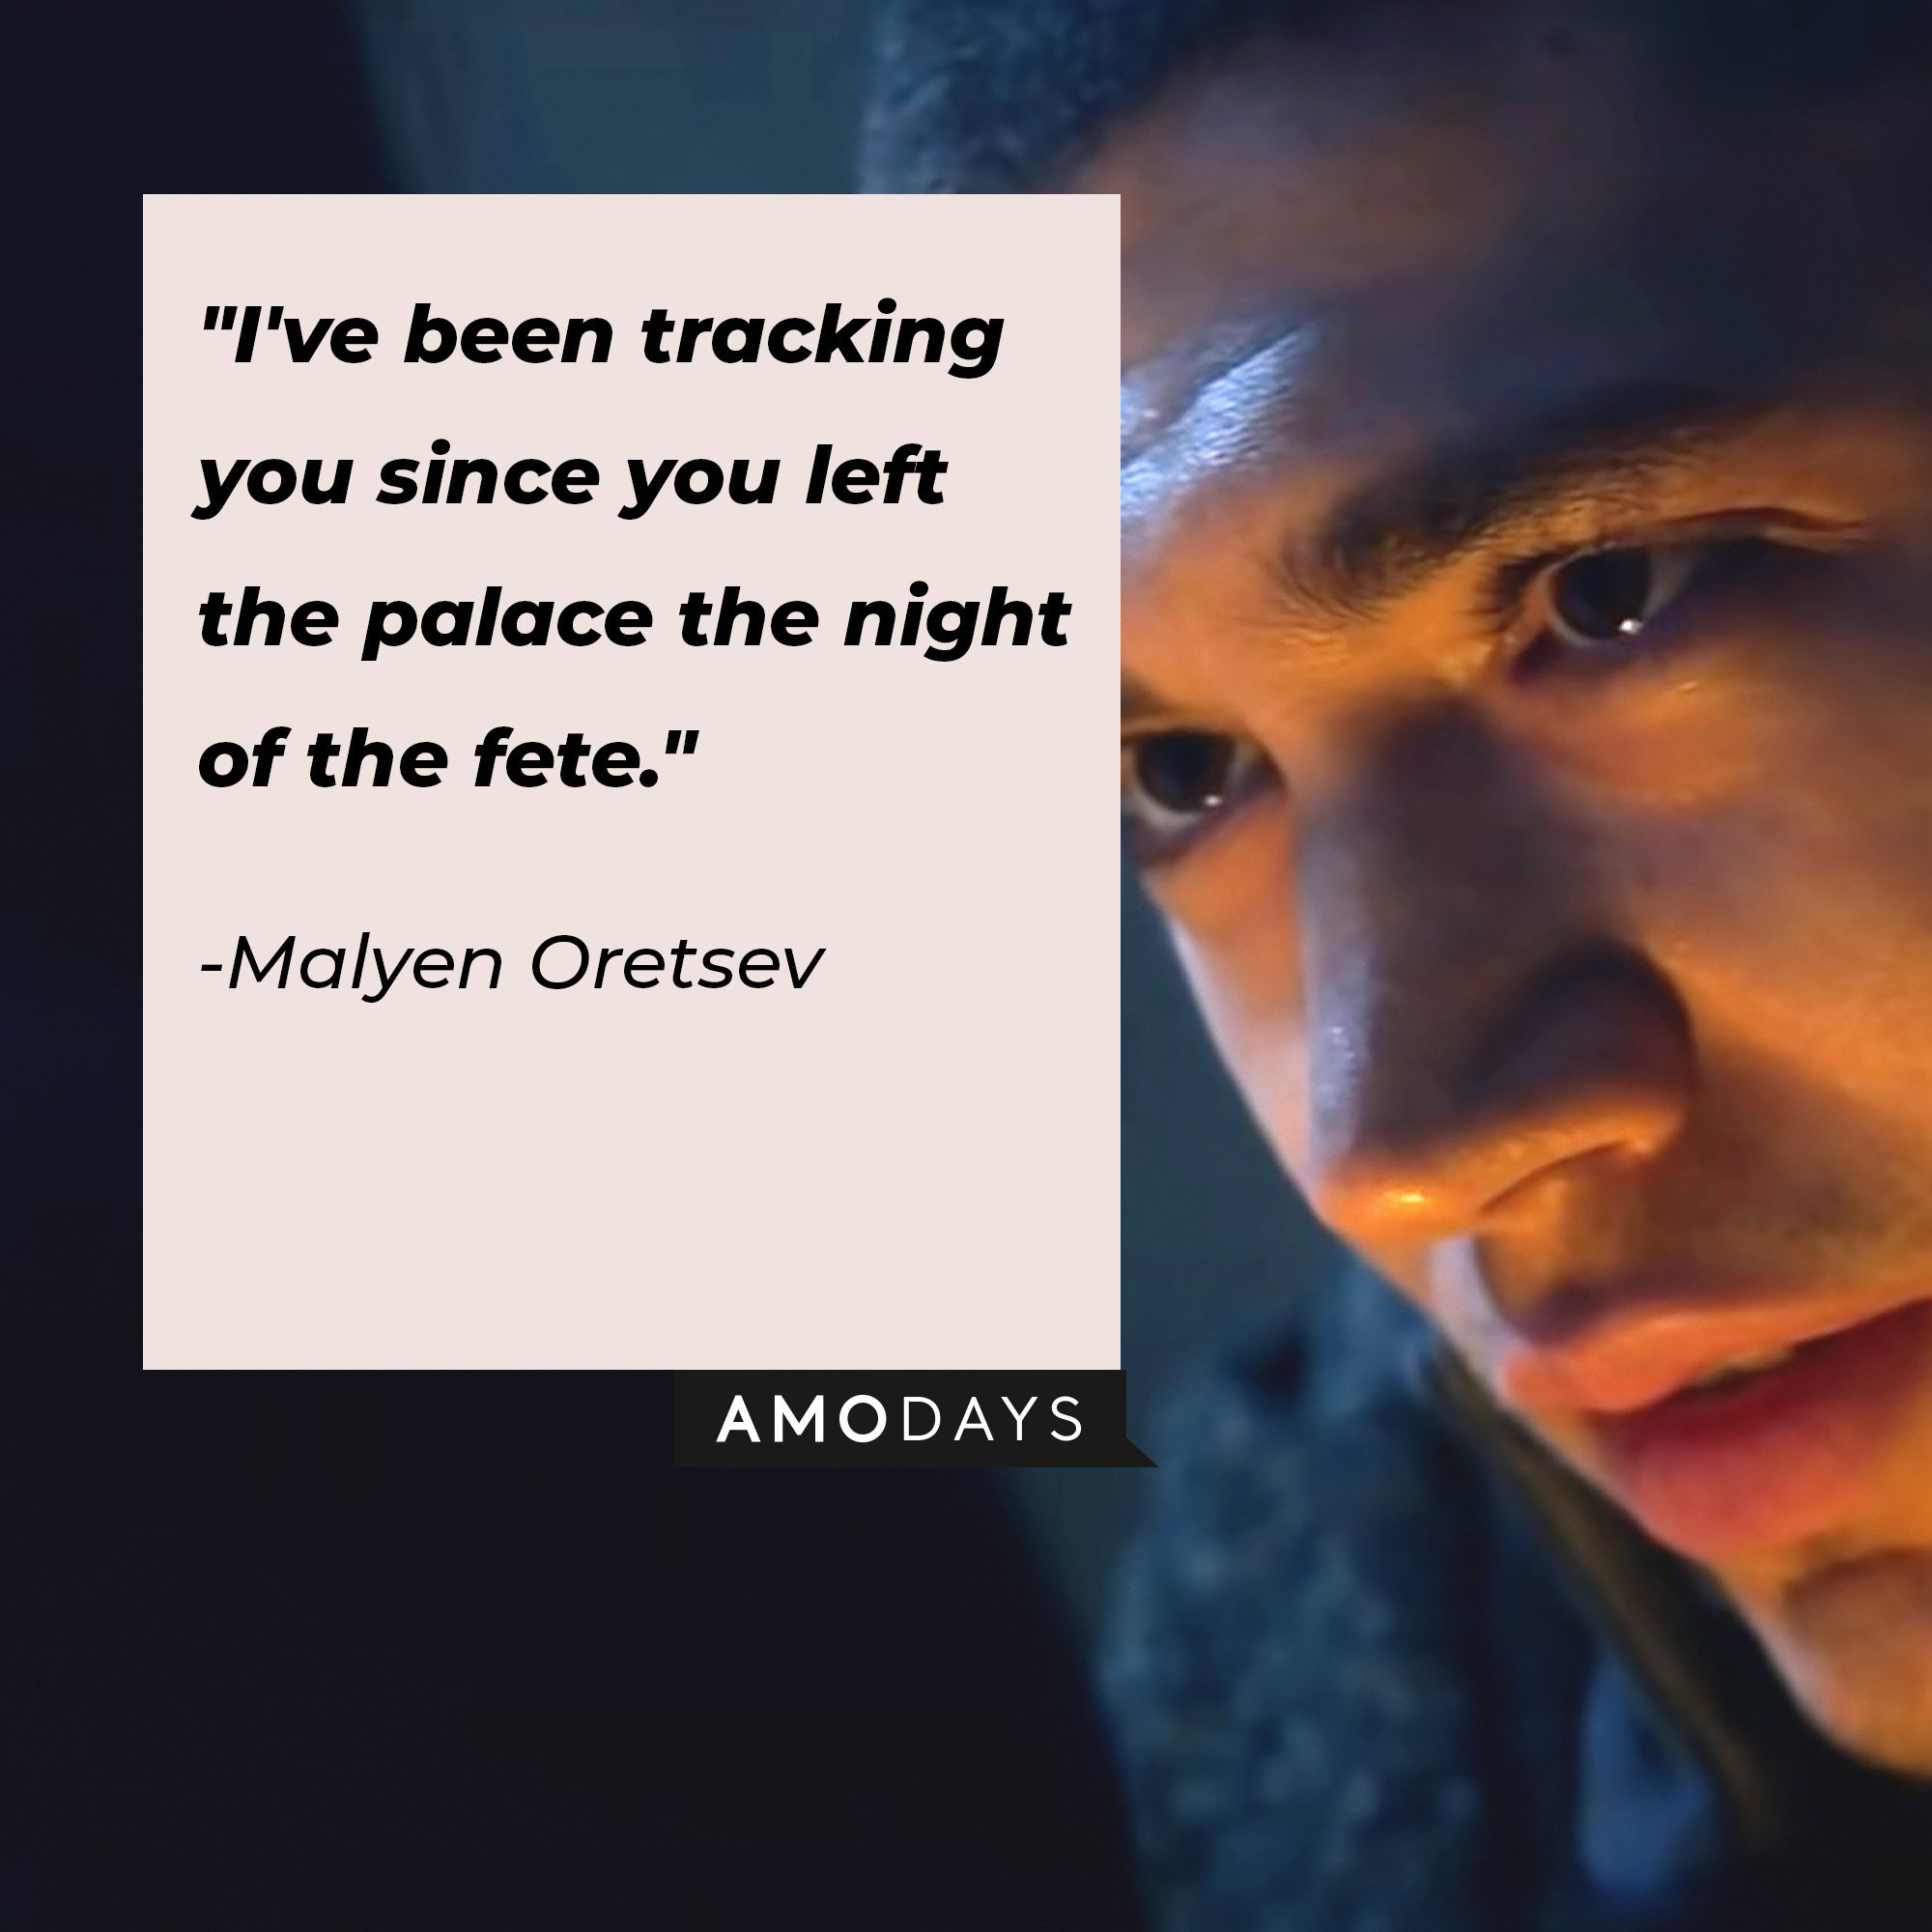 Malyen Oretsev's quote: "I've been tracking you since you left the palace the night of the fete." | Image: AmoDays